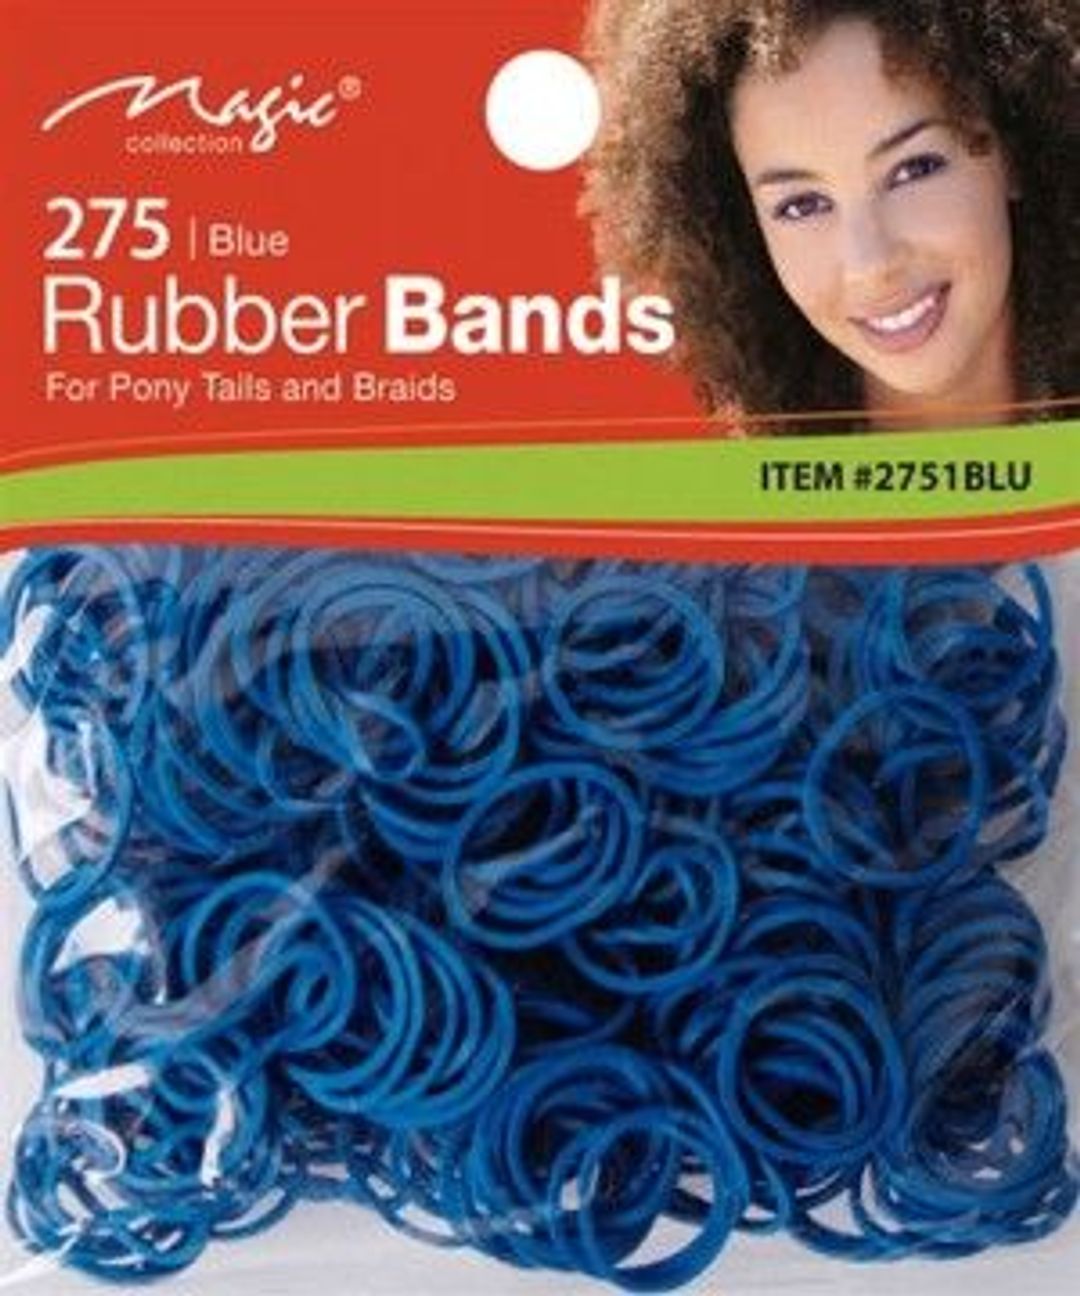 Magic Collection 275 Rubber Bands Blue - 2751